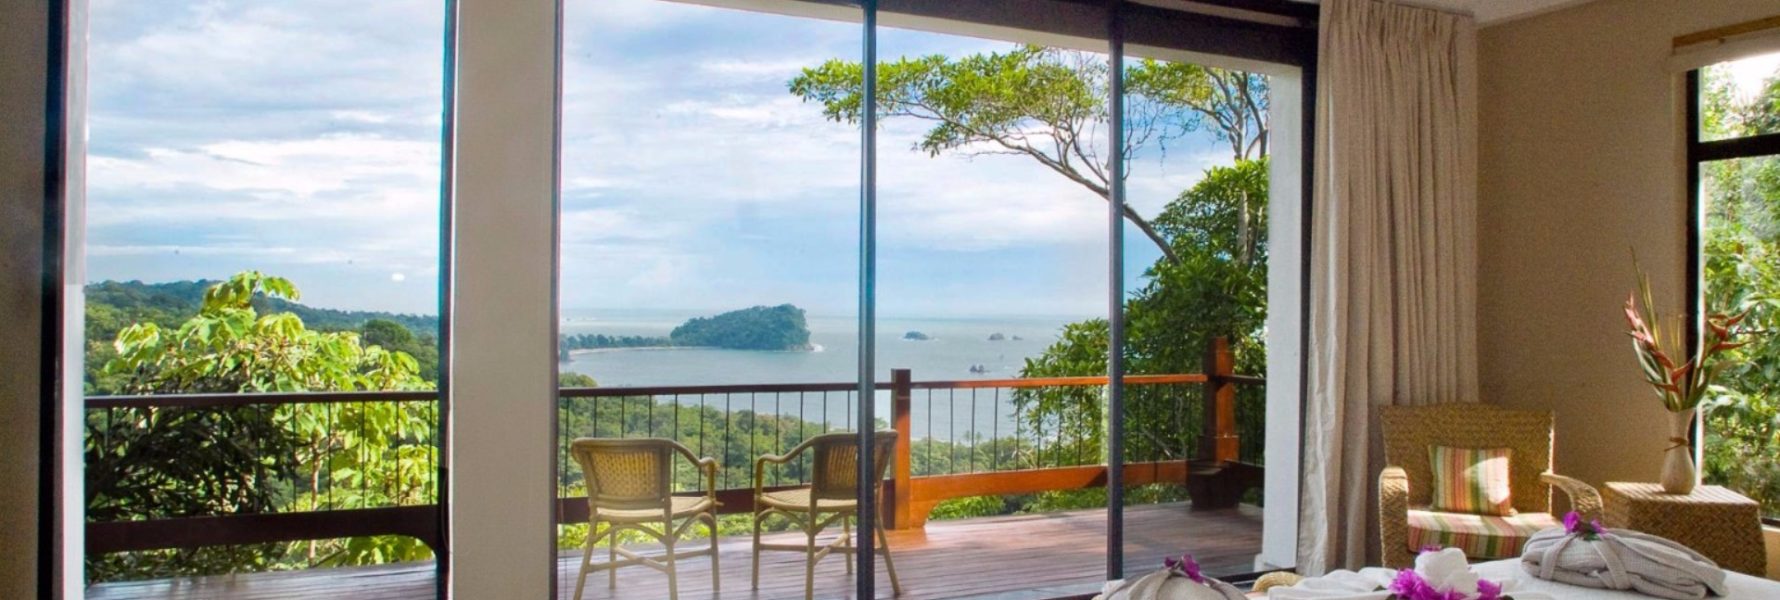 The master bedroom has a private balcony with an amazing view at this Manuel Antonio vacation home. Monkeys are sure to visit almost every day!